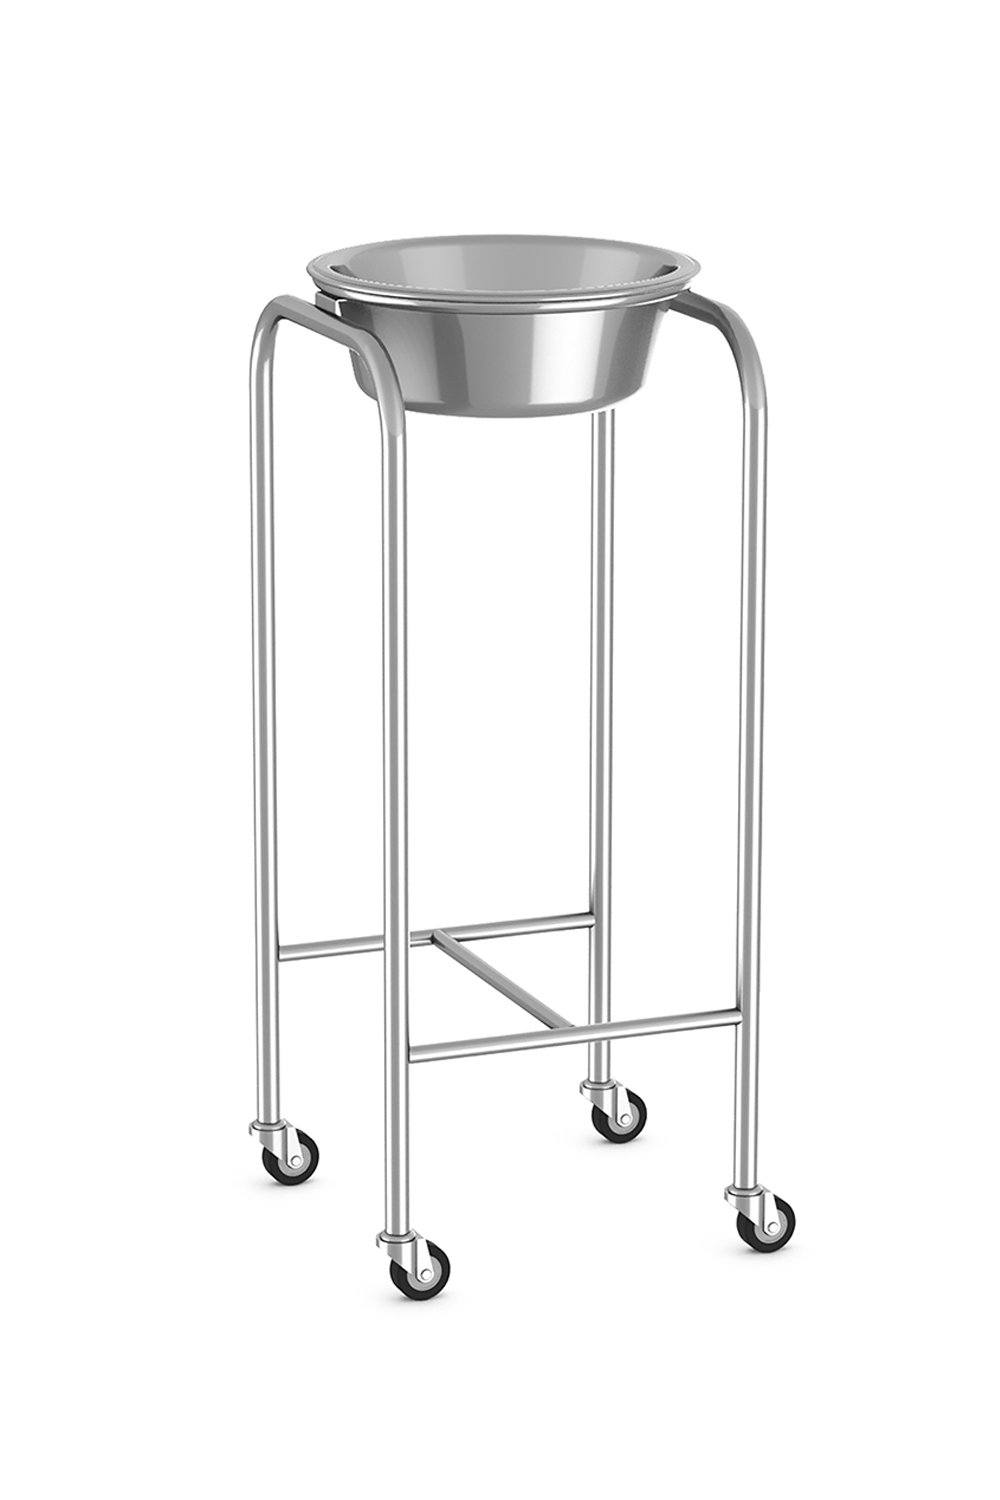 Solution Stand Stainless Solutions Acart 14"W x 14"D x 34"H 7 Quart Basin with H Brace 